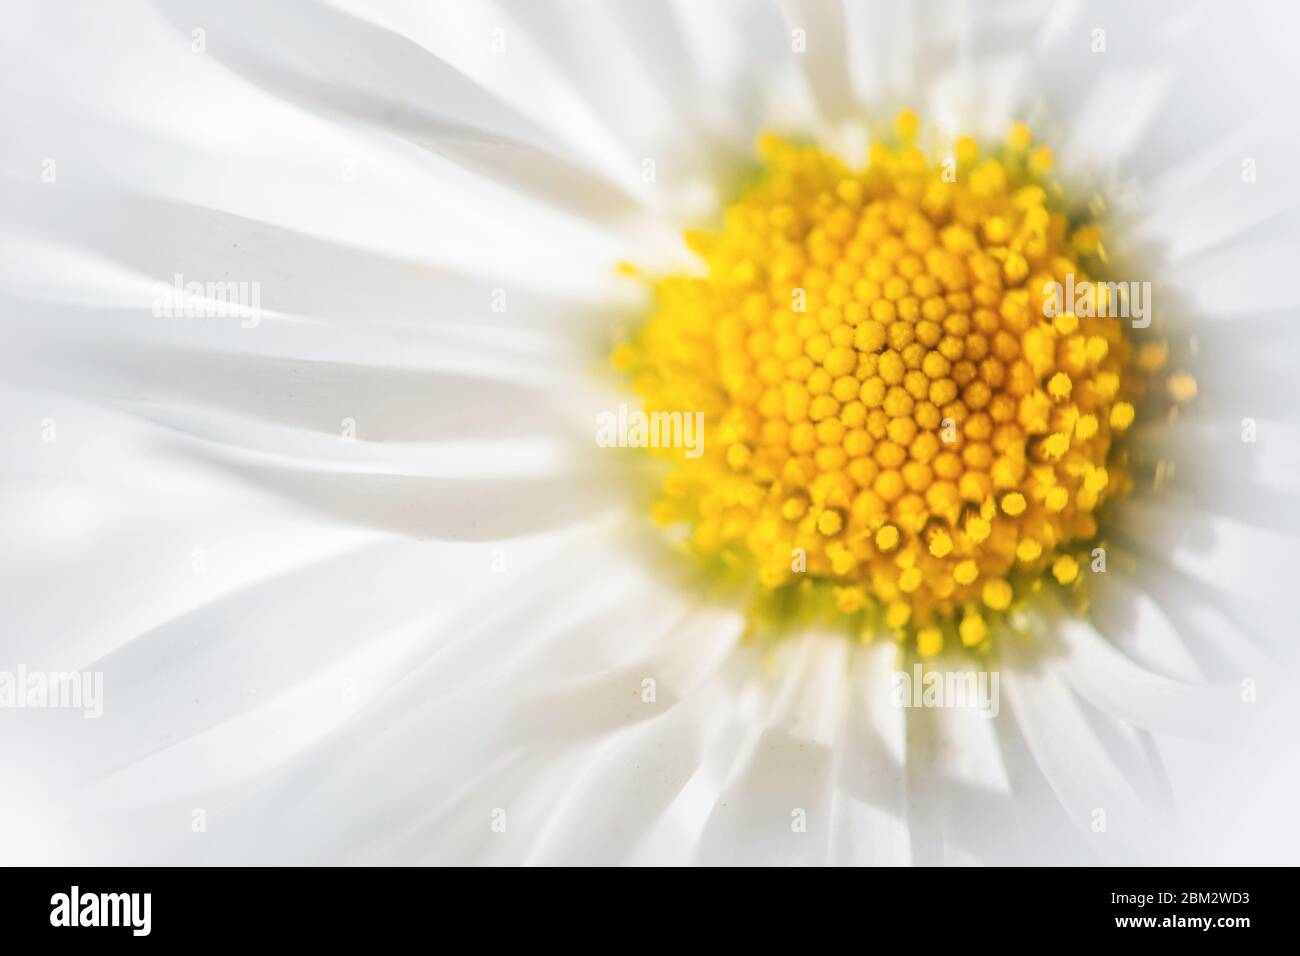 Defocused white big daisy flower, daisy flowers close-up, yellow middle white petals, abstract blurred  floral background Stock Photo